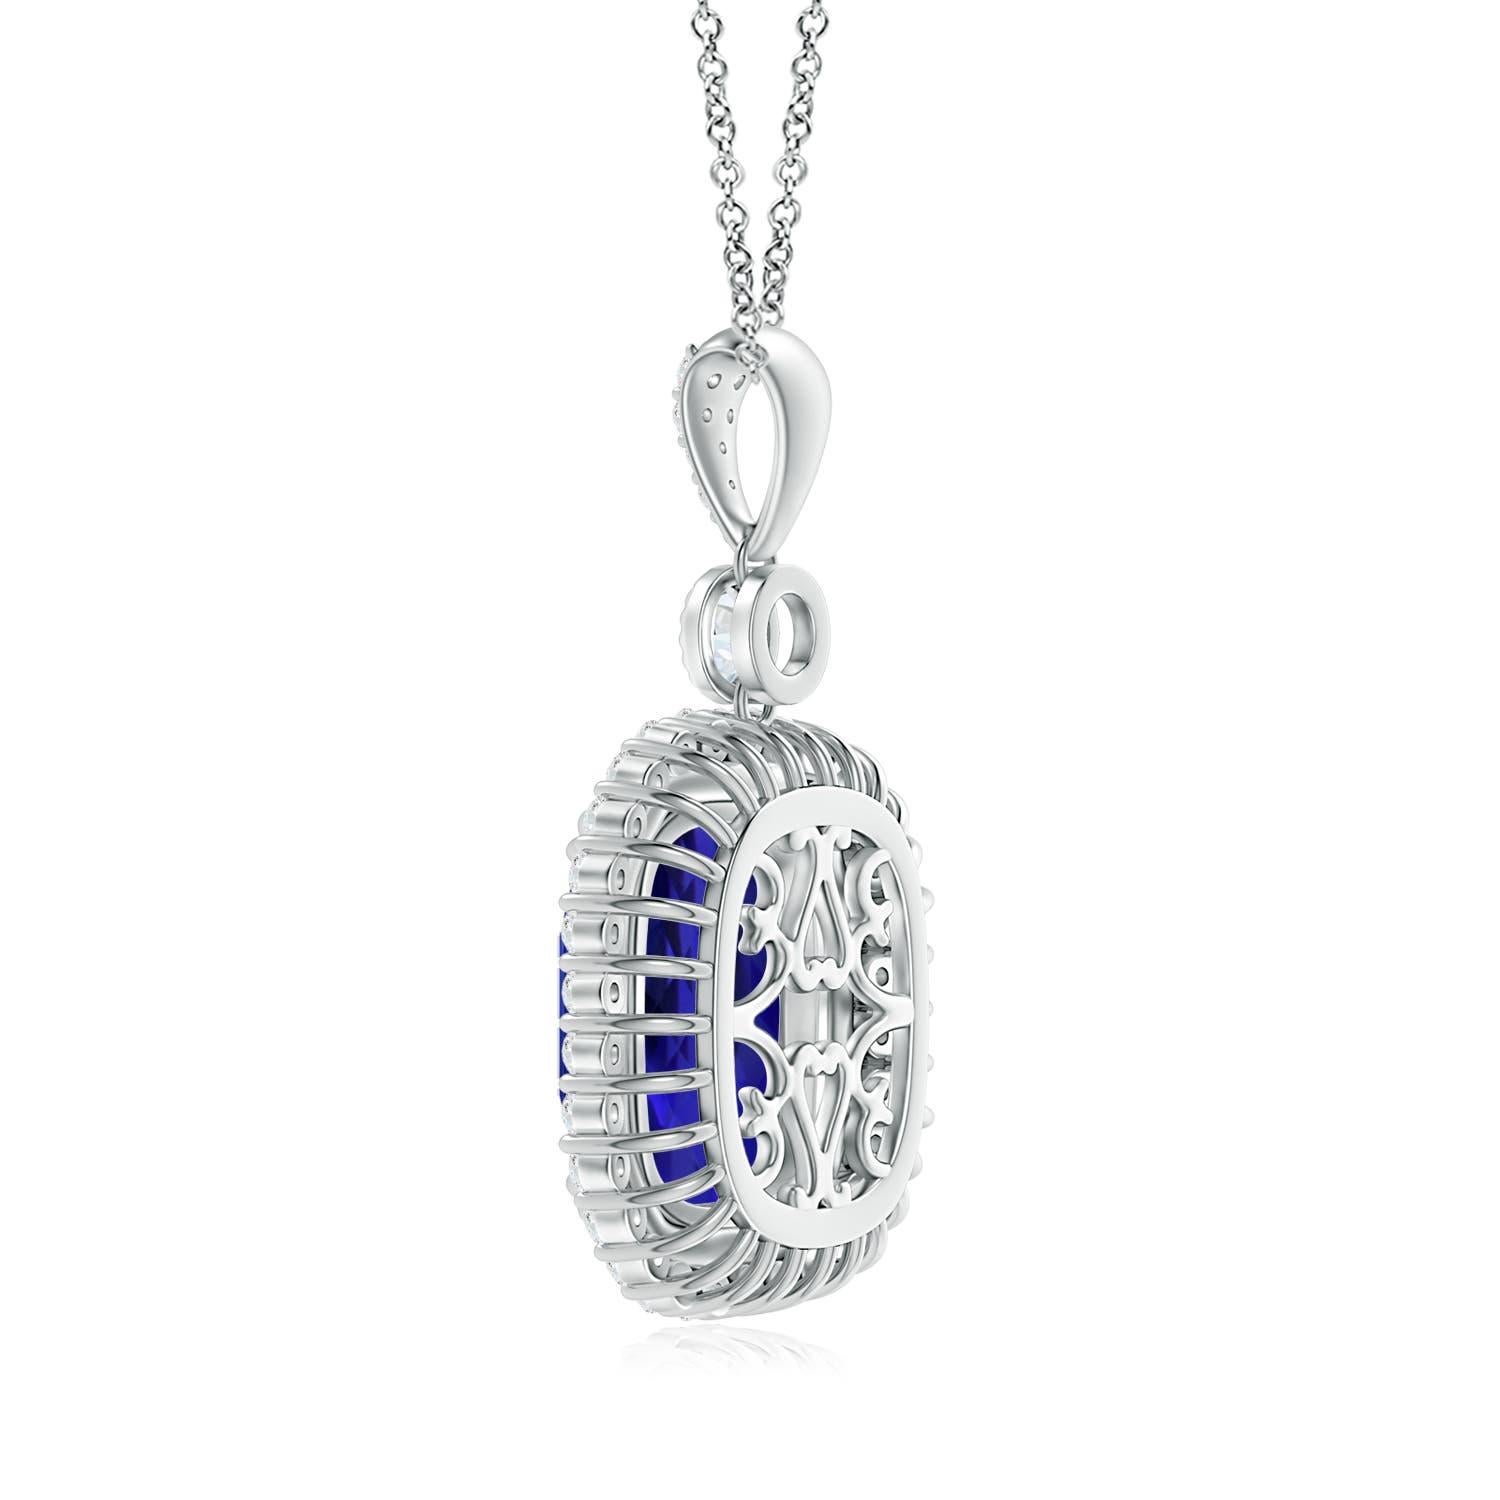 Glowing in the center of a double halo of diamonds, the GIA certified cushion tanzanite draws attention to its striking bluish-violet hue. A bezel-set round station diamond links the double claw-set tanzanite to a diamond studded bale. Inspired by